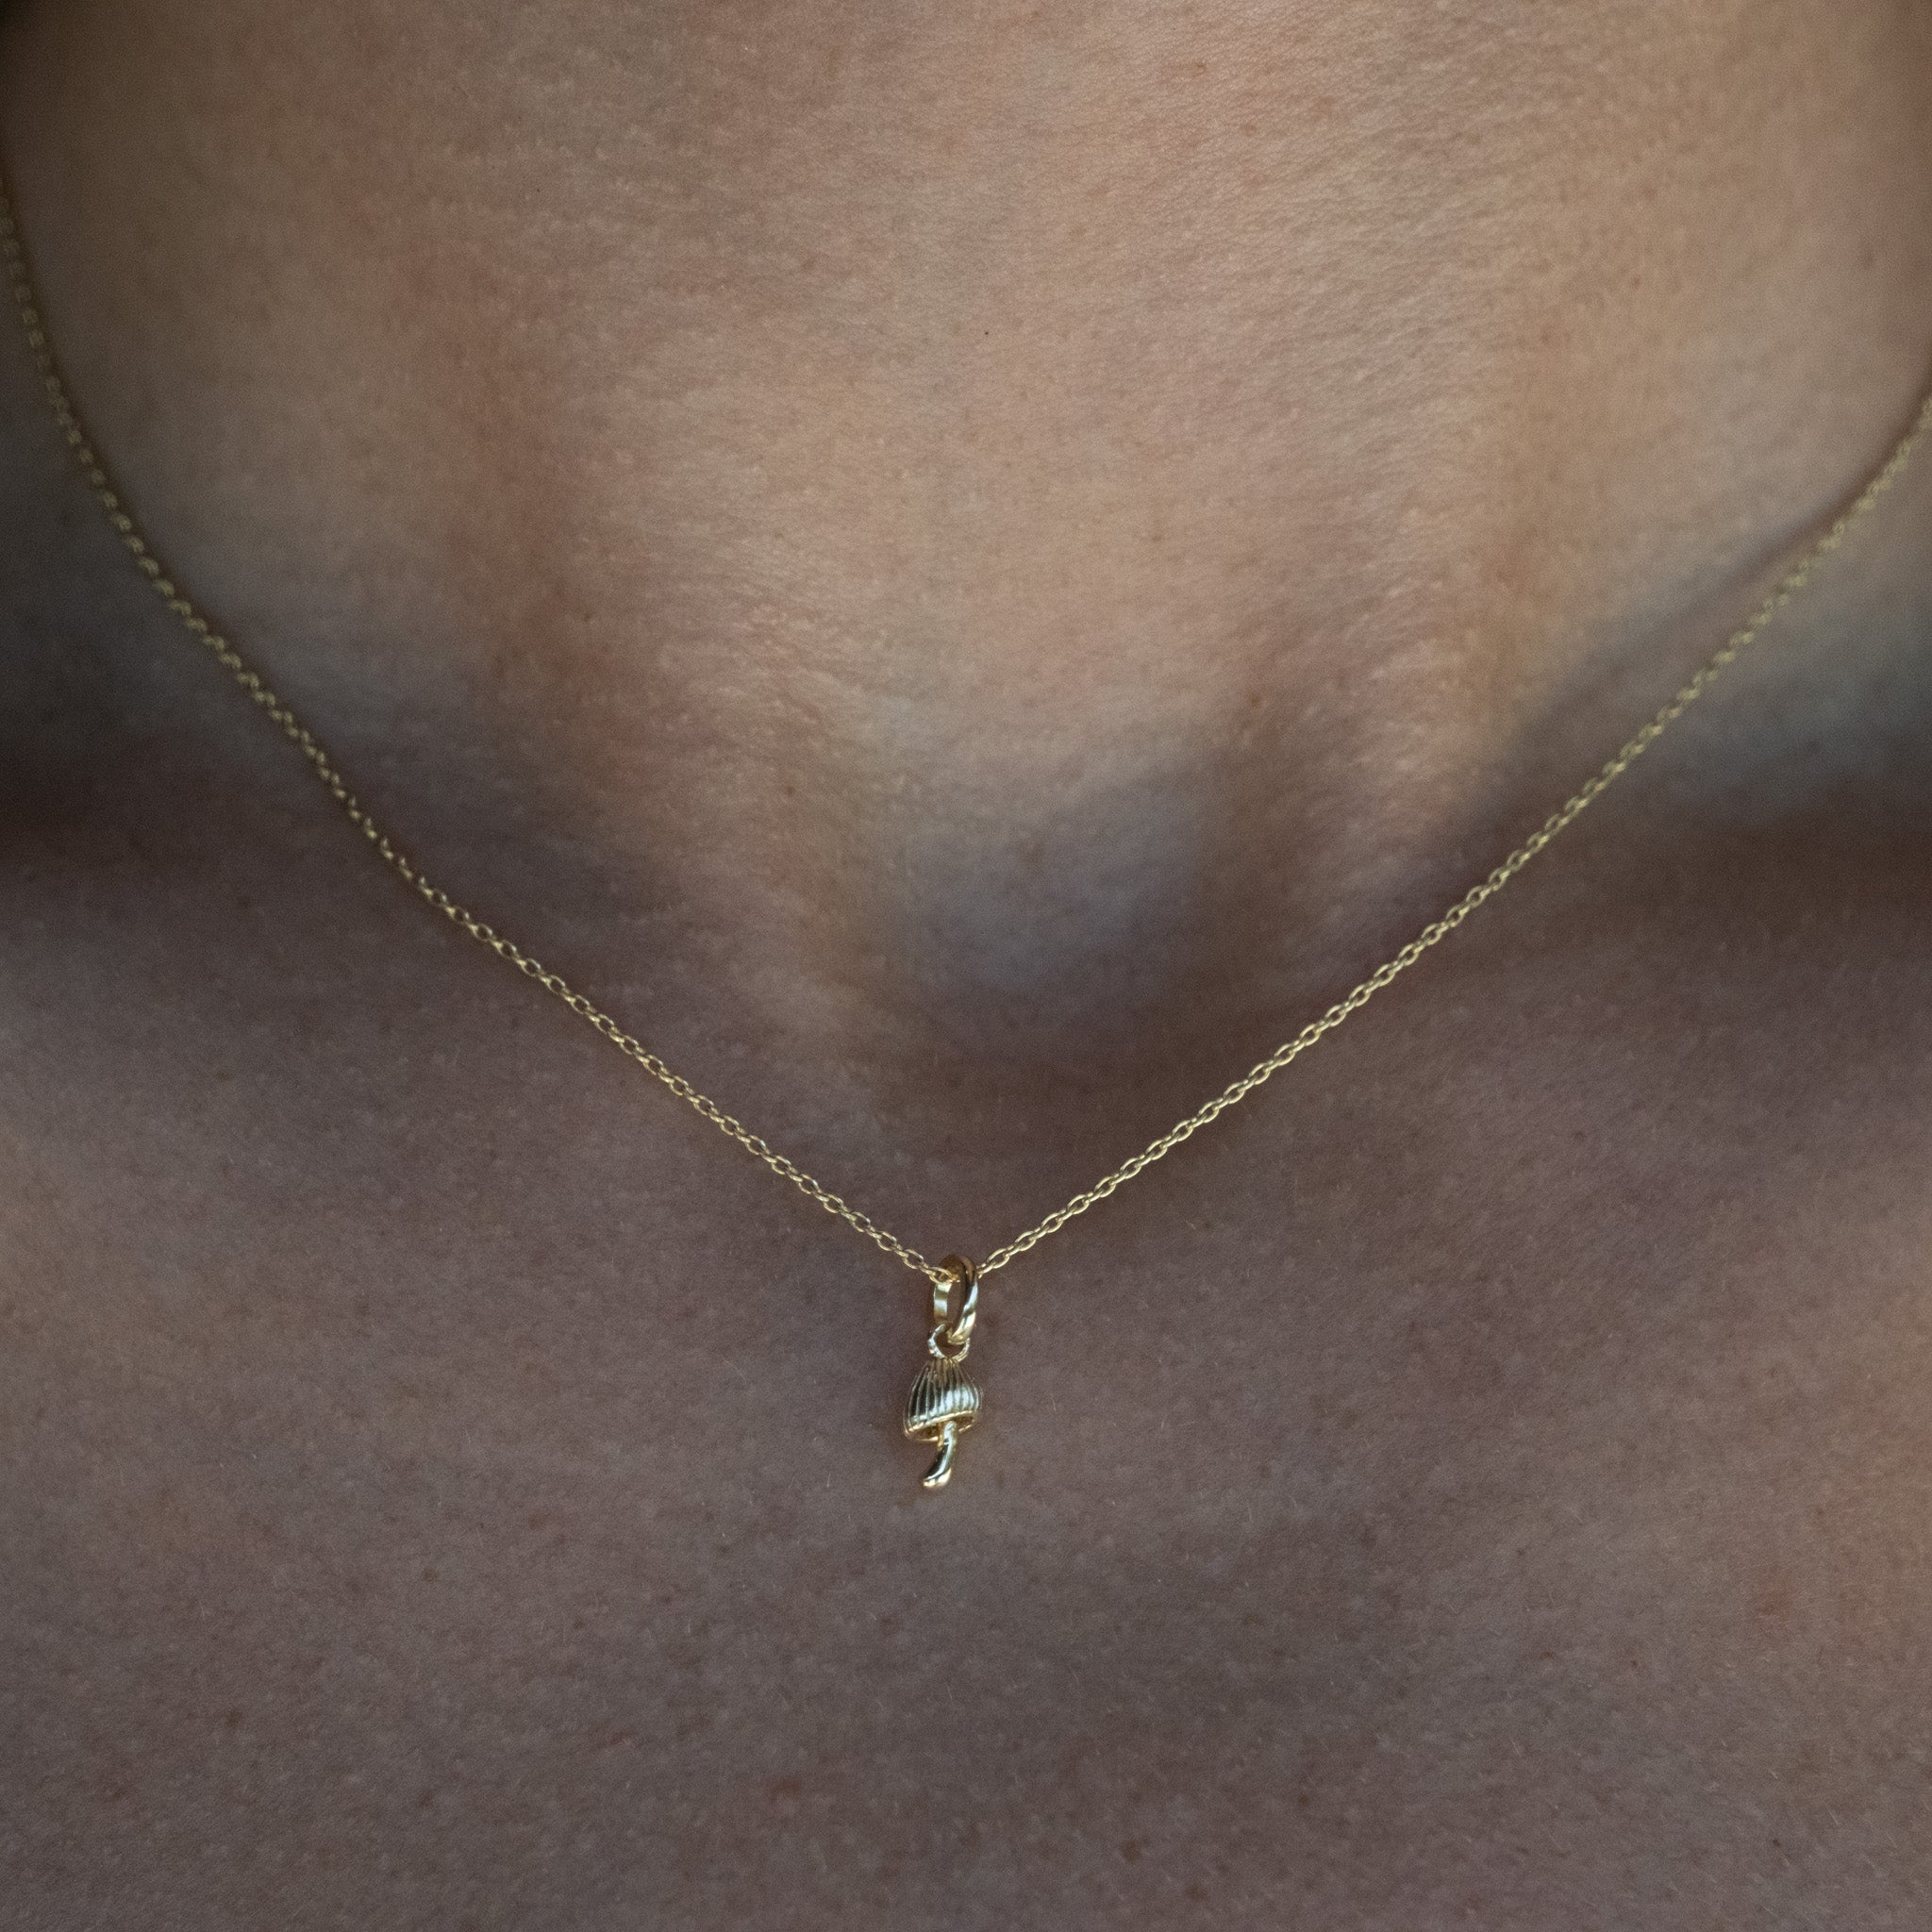 A close up of a person wearing an Aiden Jae Mini Mushroom Charm necklace.